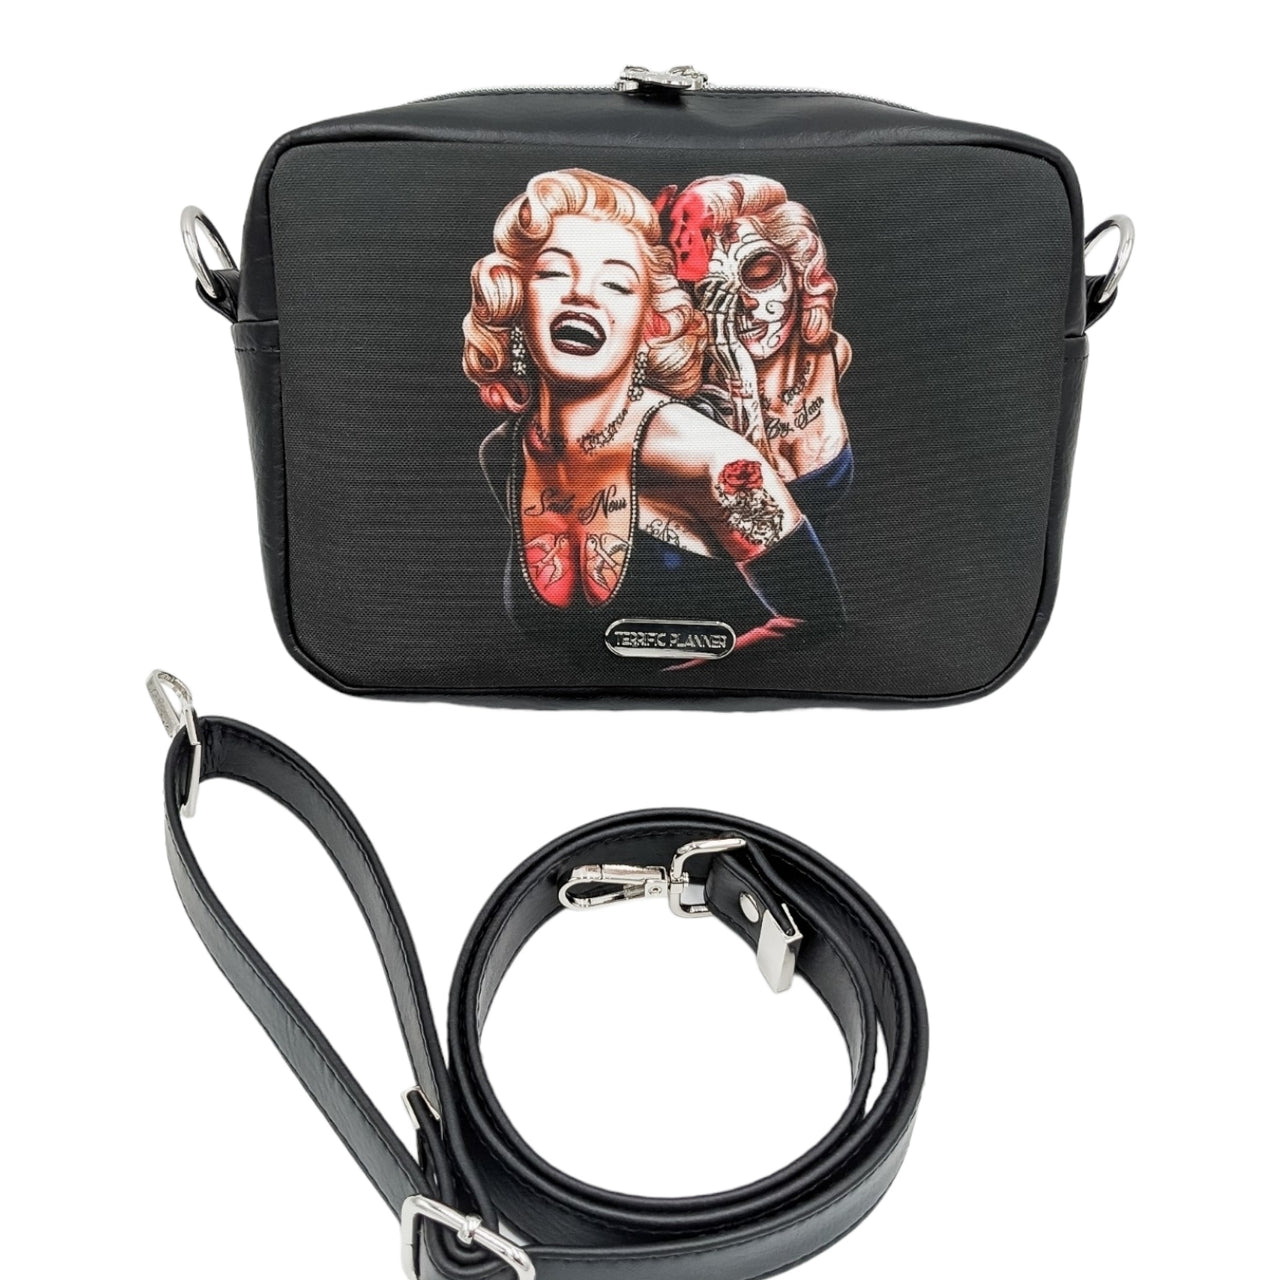 Marilyn Smile Now Cry Later Boxy Crossbody Bag